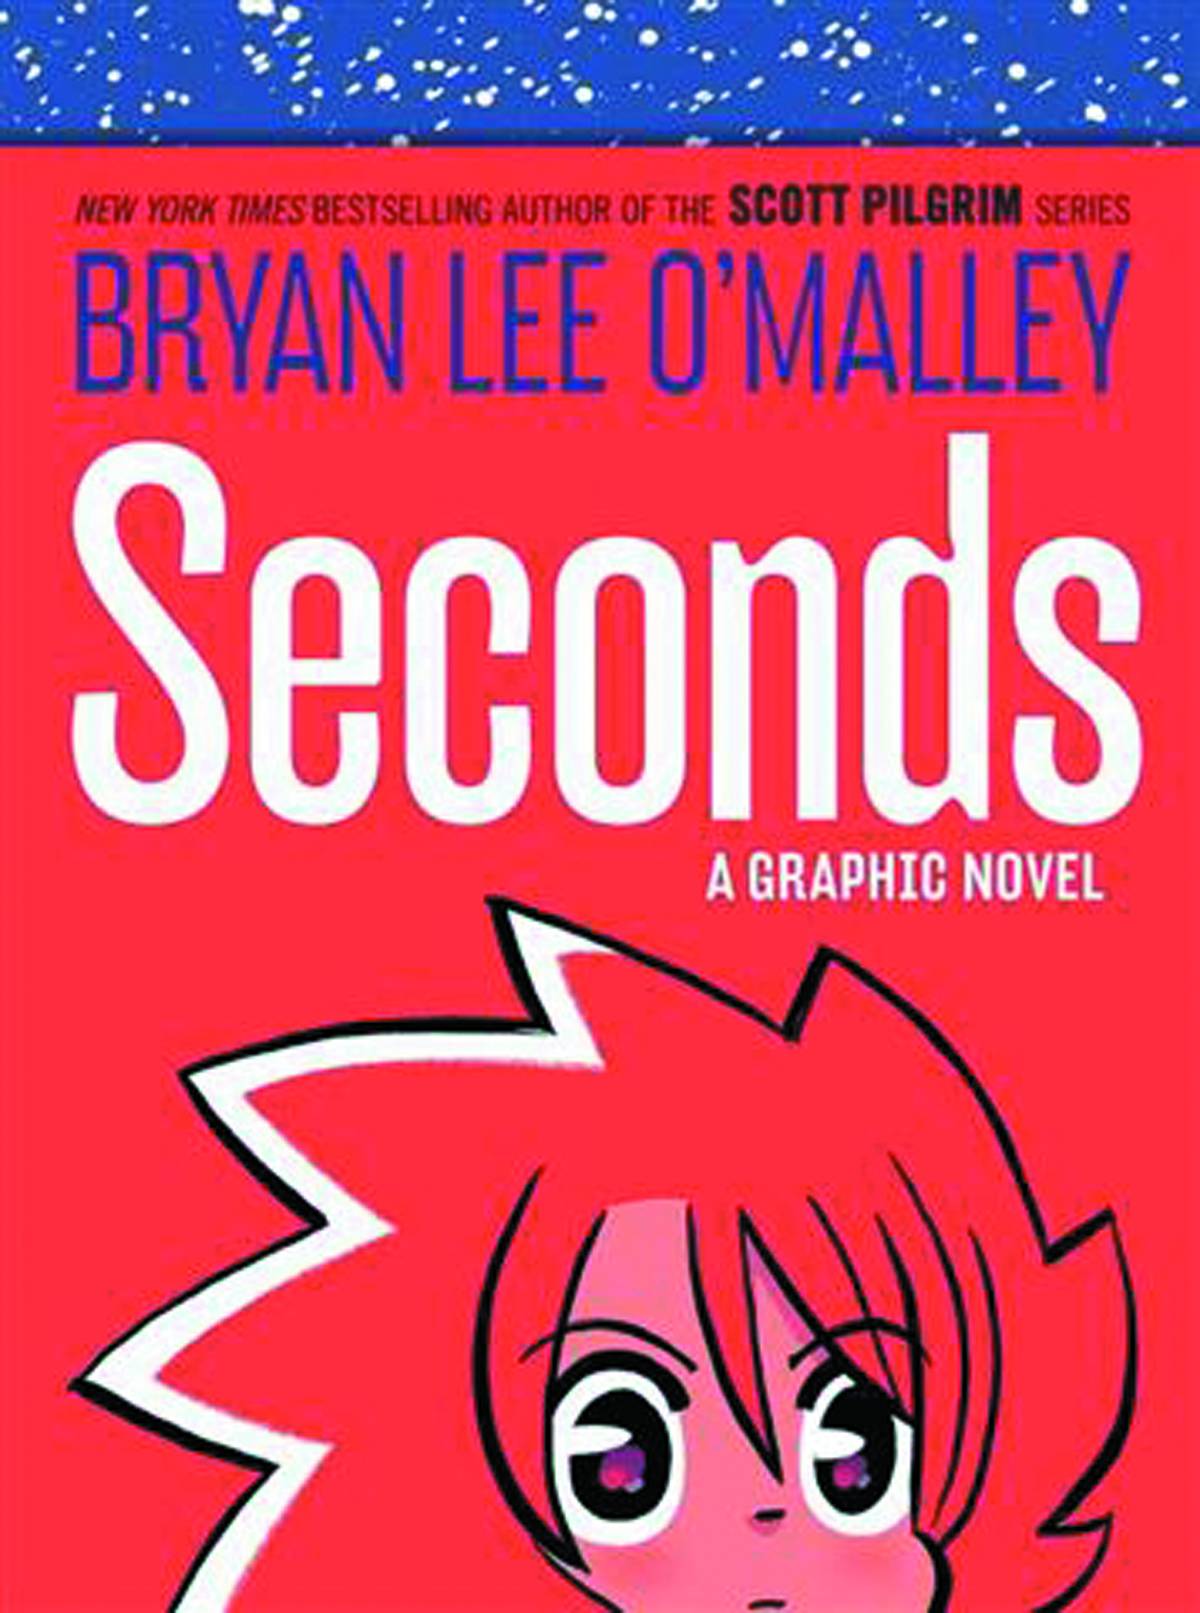 Bryan Lee O Malley Seconds Graphic Novel